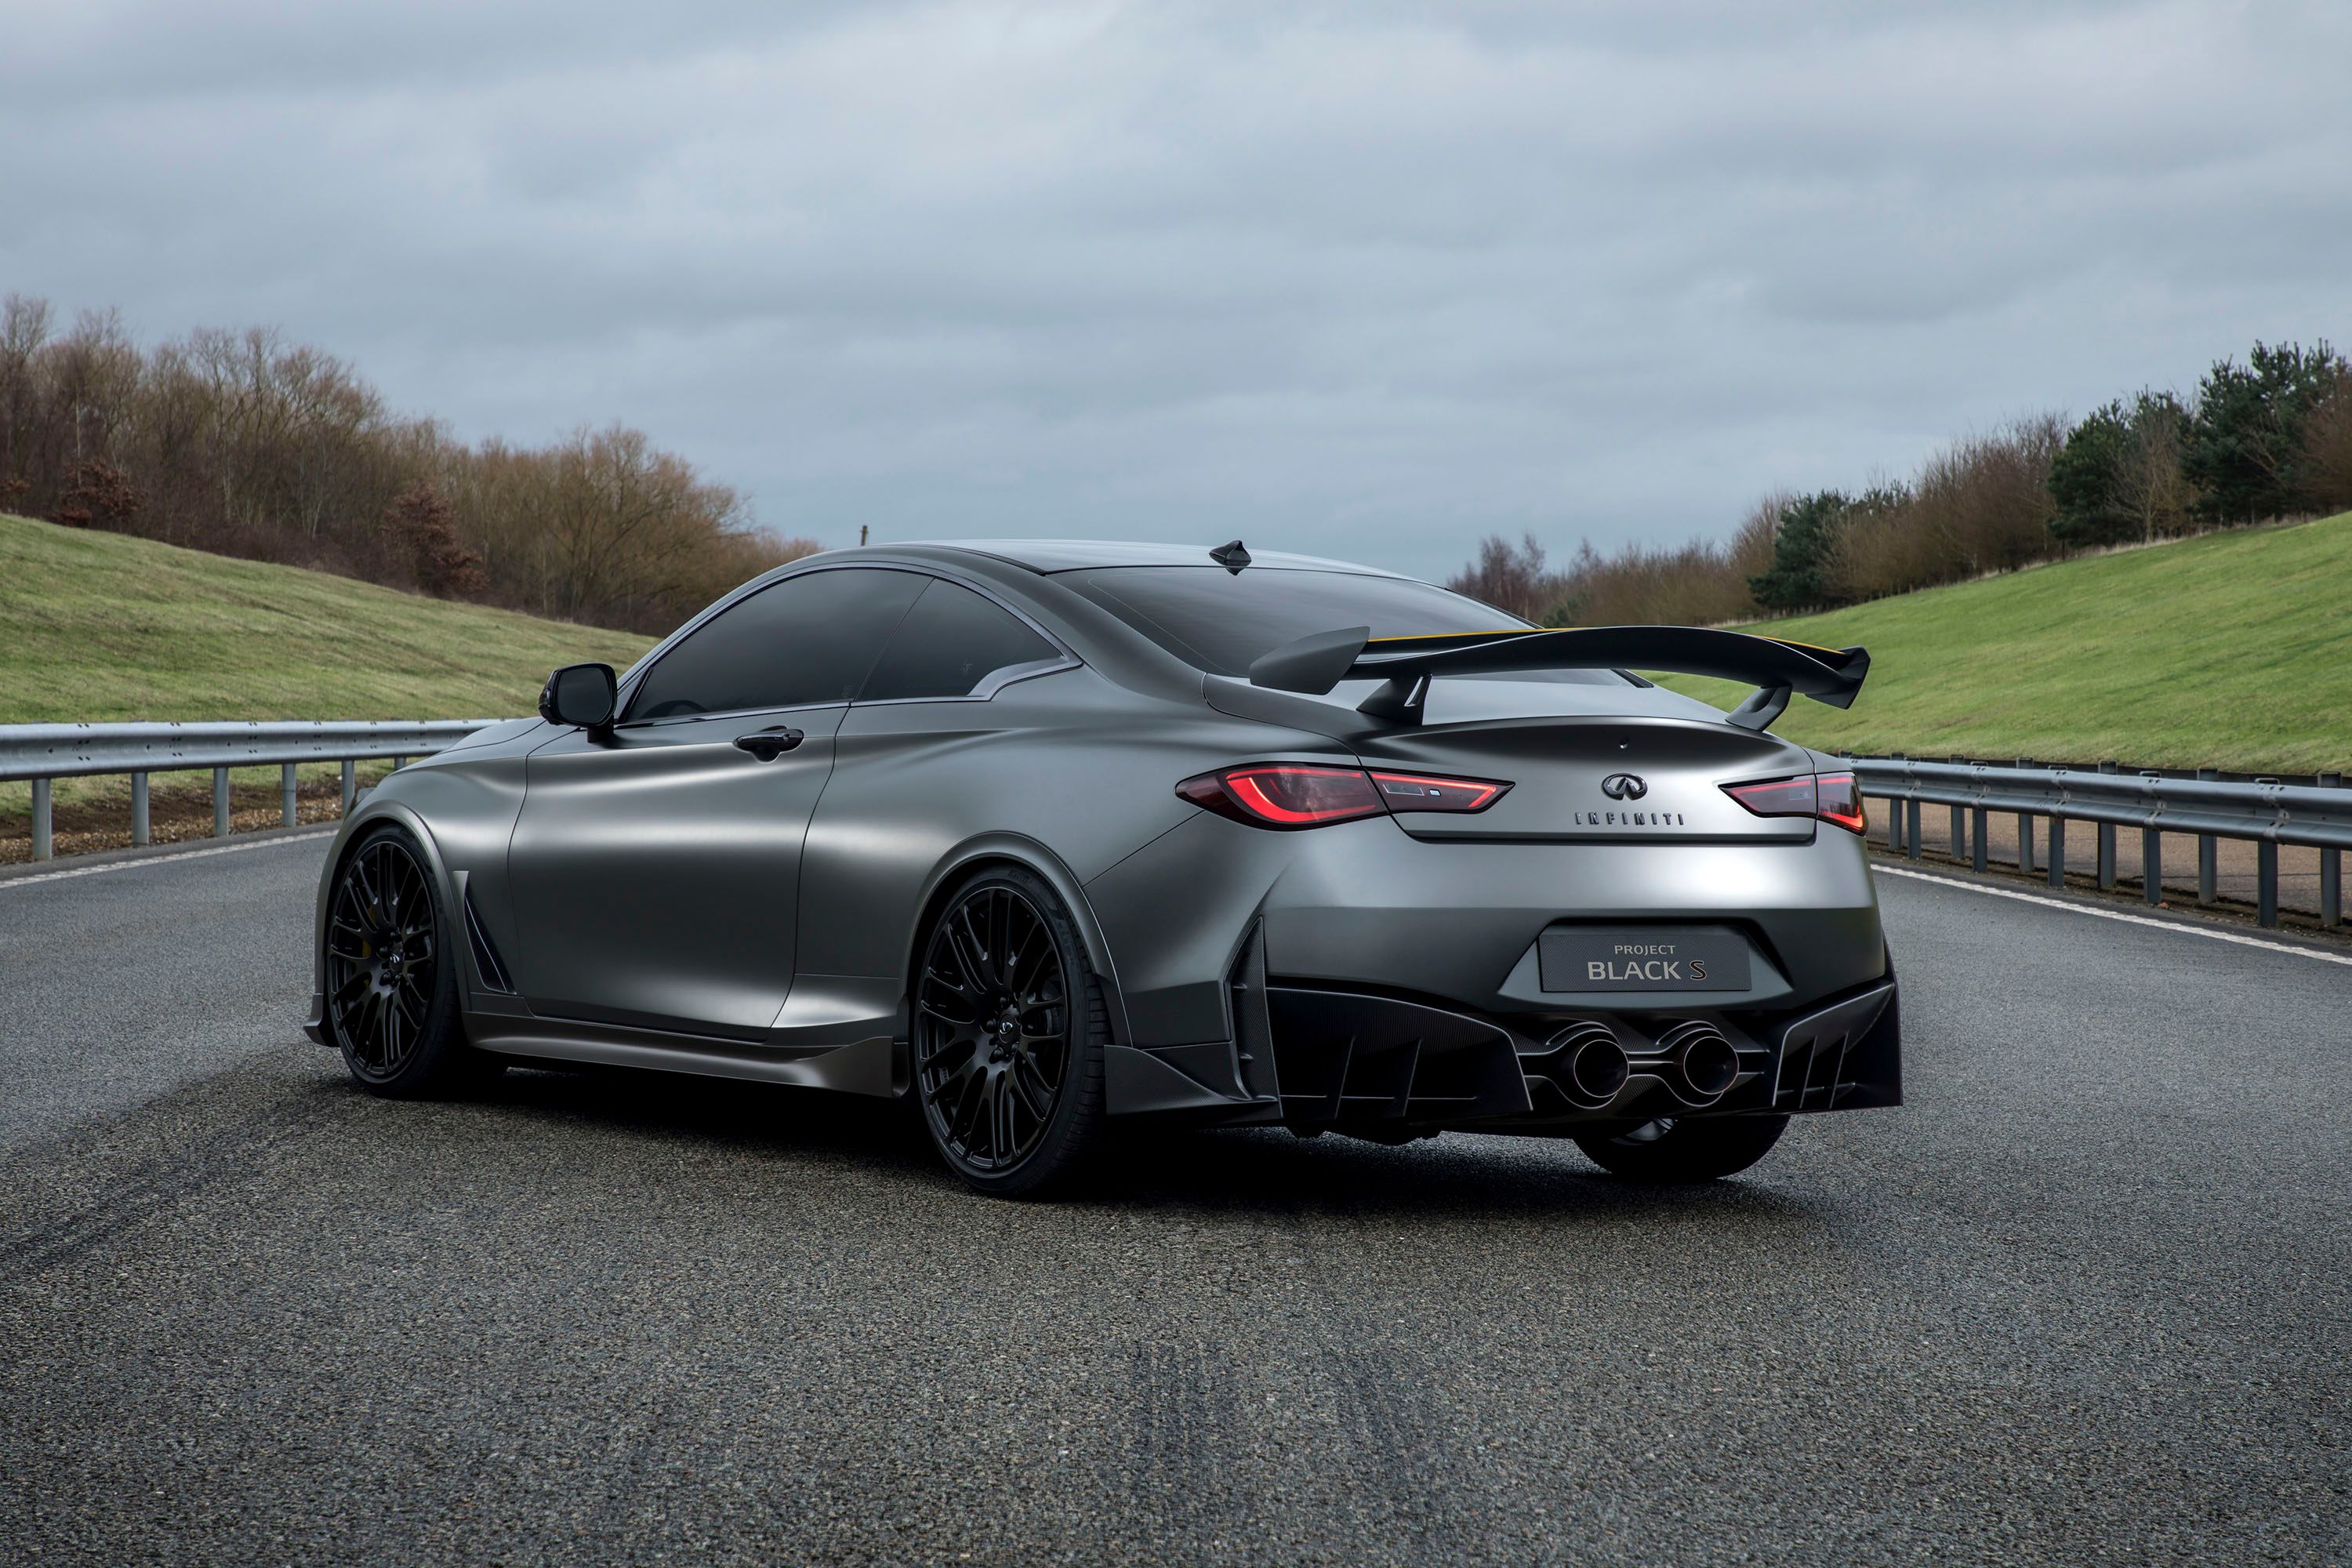 2018 Wallpaper of the Day: 2016 Infiniti Project Black S